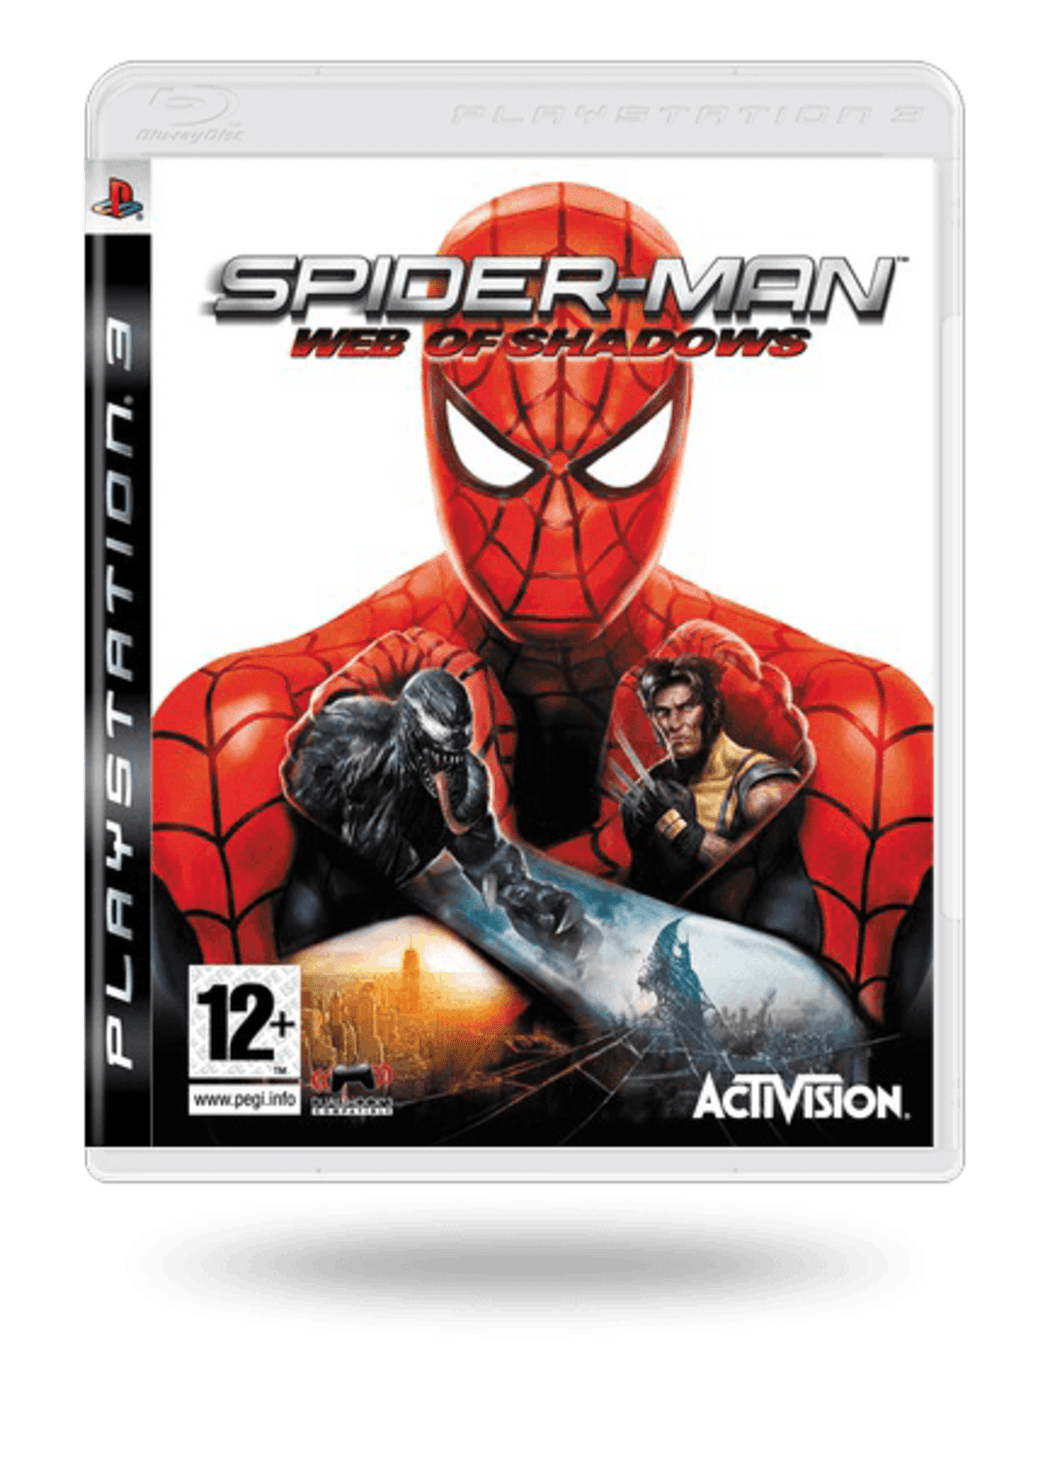 Spider-Man Web of Shadows for Xbox 360 -NEW 